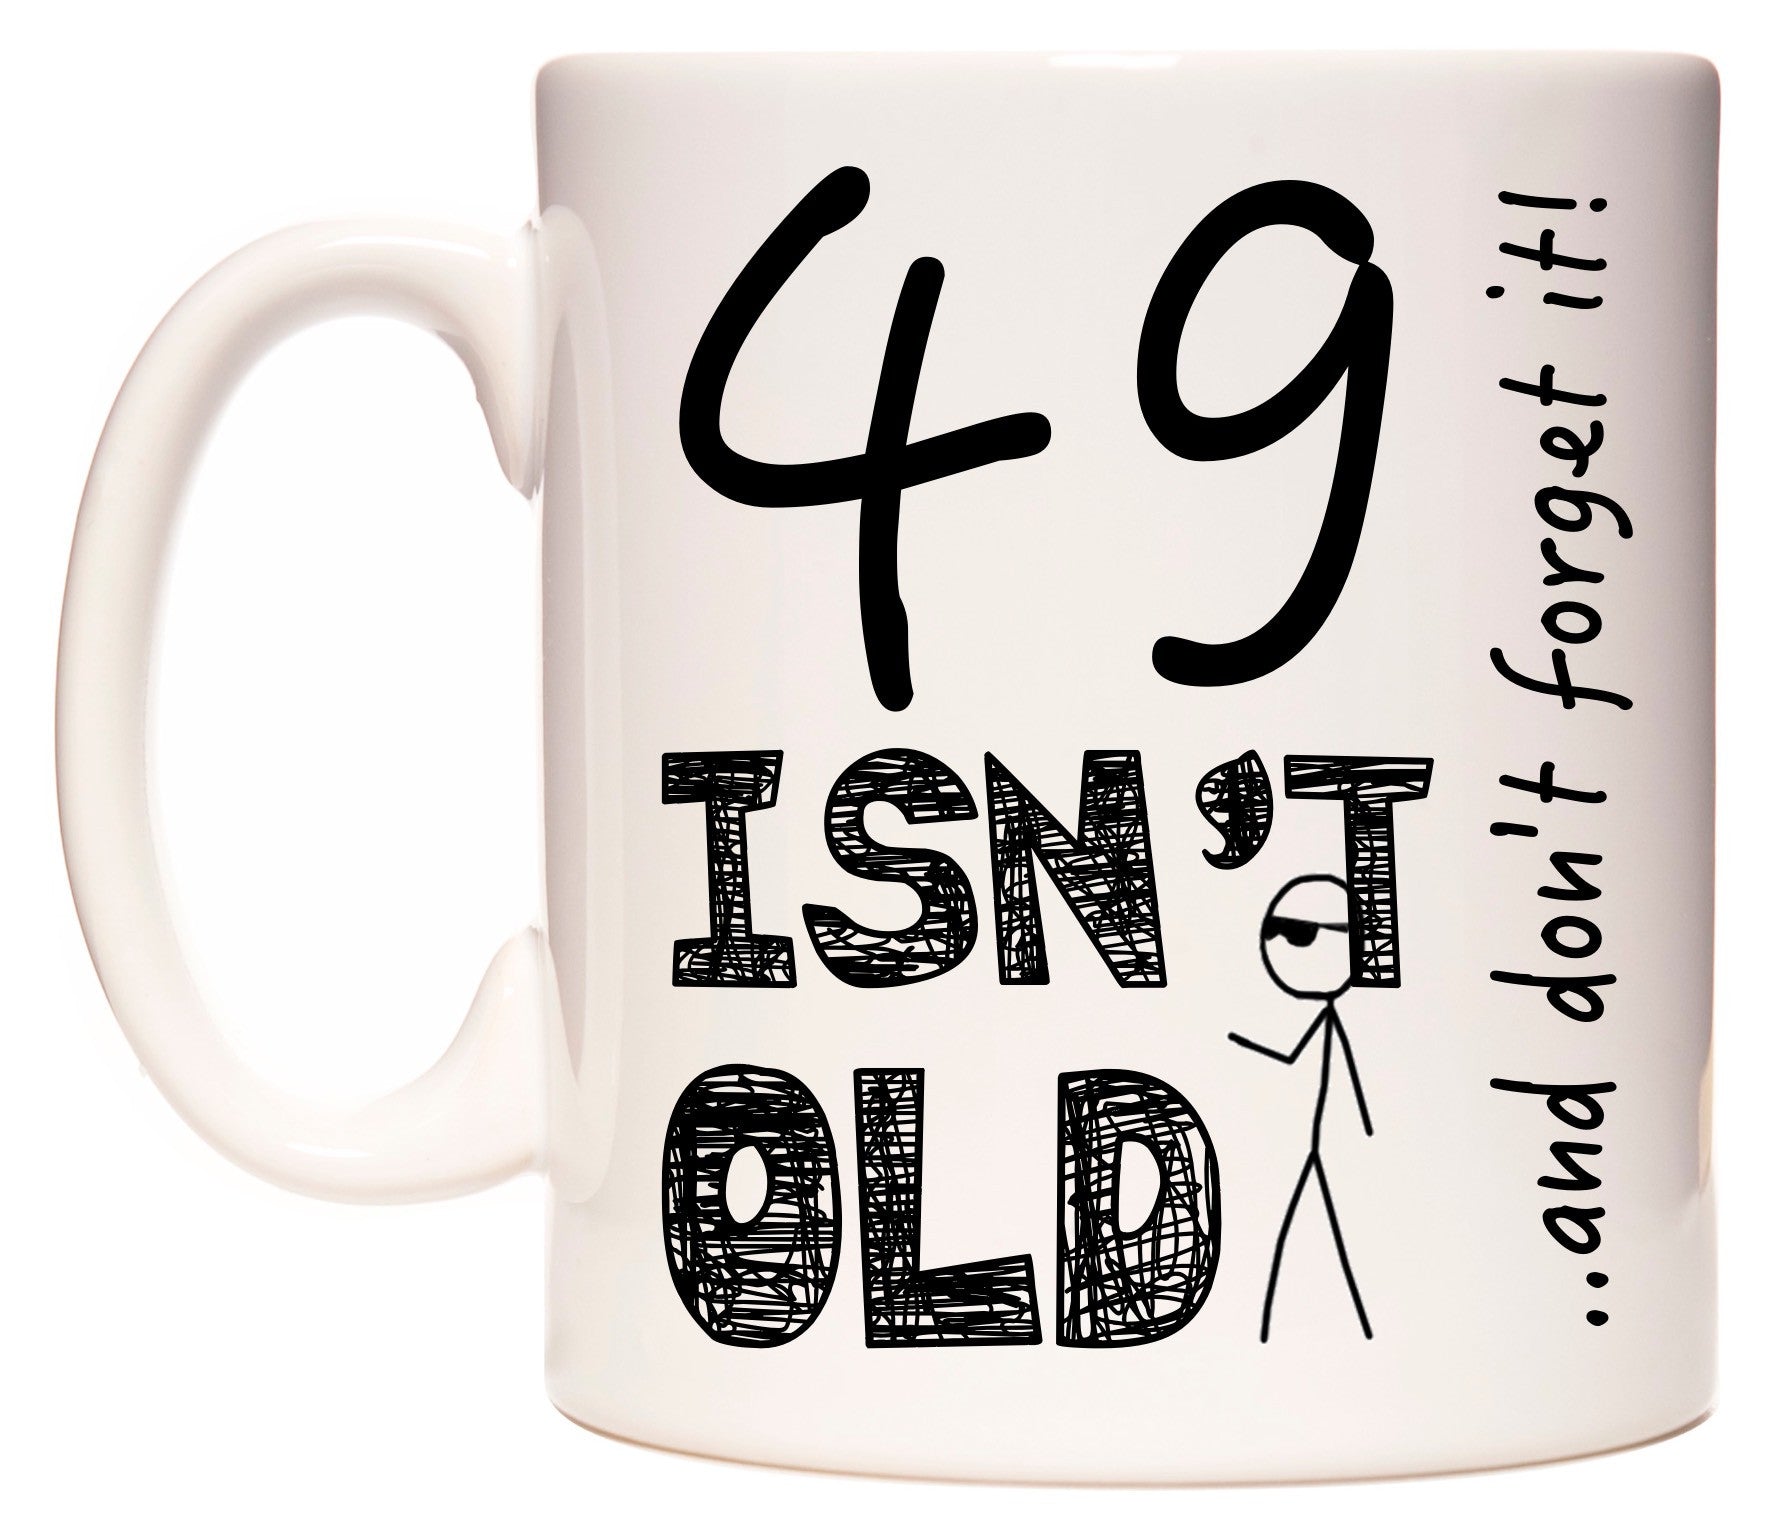 This mug features 49 Isn't Old